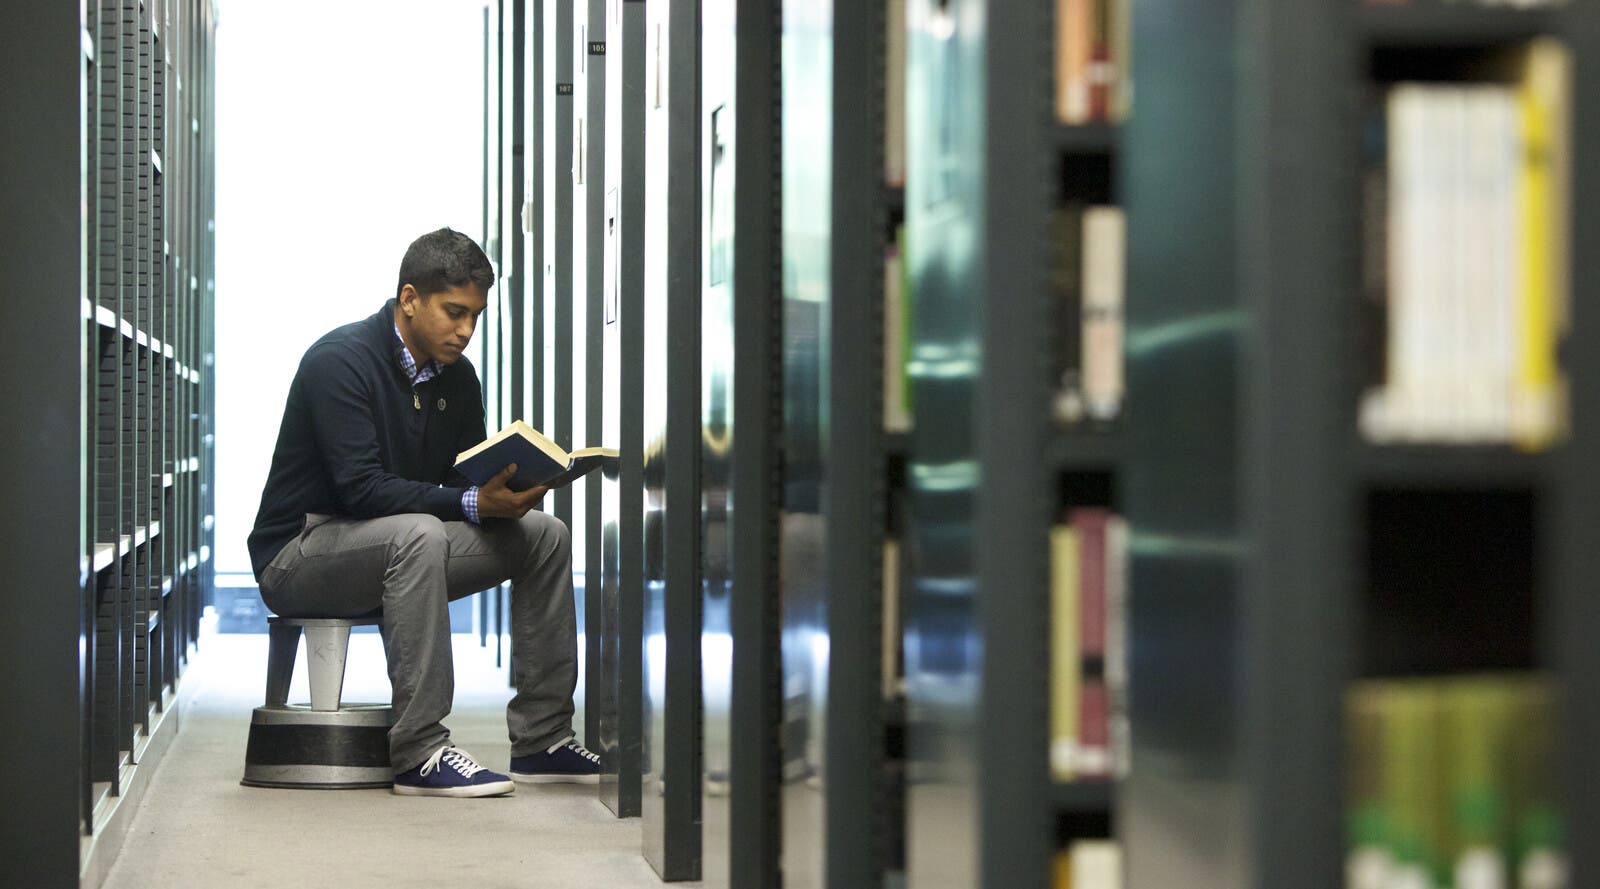 student sitting down and reading a book in the library